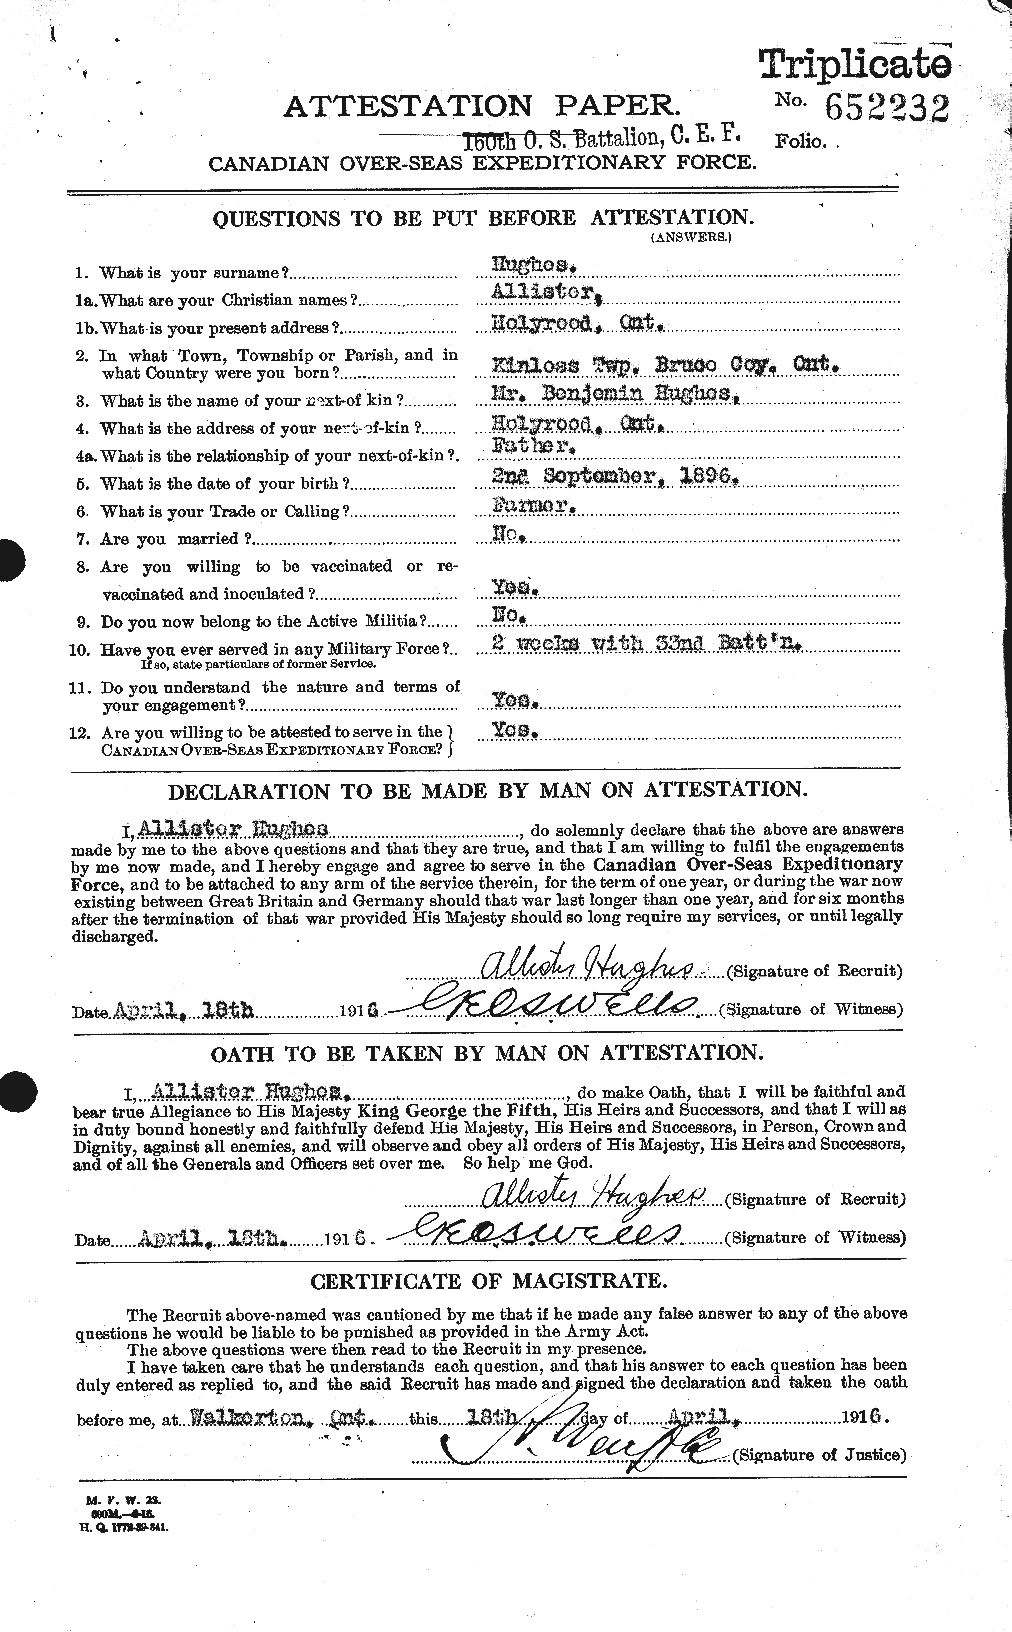 Personnel Records of the First World War - CEF 402546a